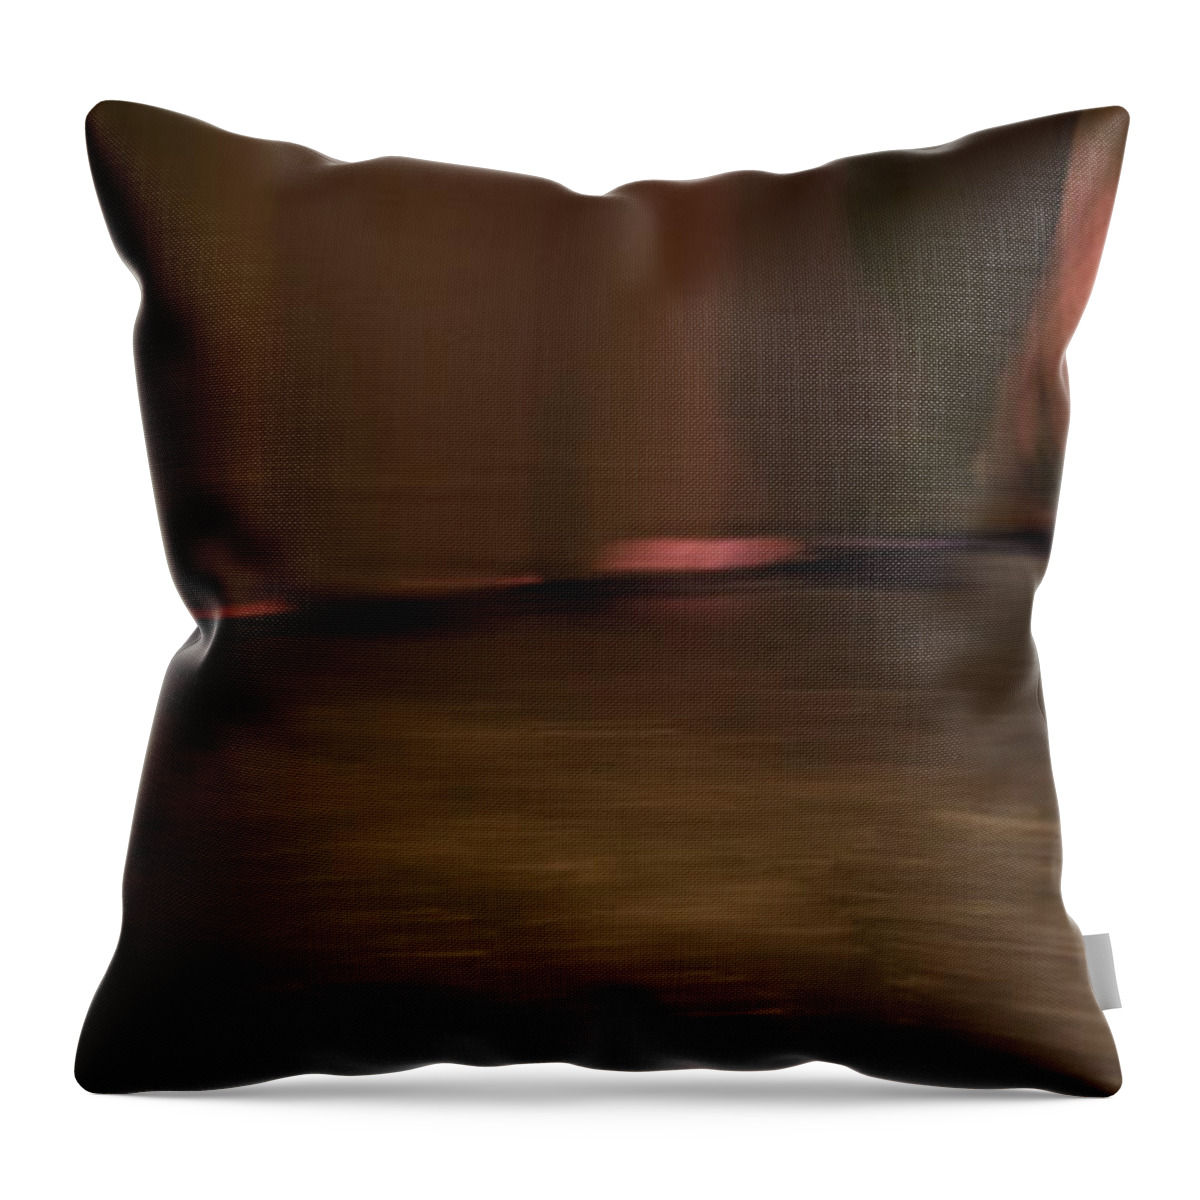 Andalusia Throw Pillow featuring the photograph Flamenco Series 8 by Catherine Sobredo